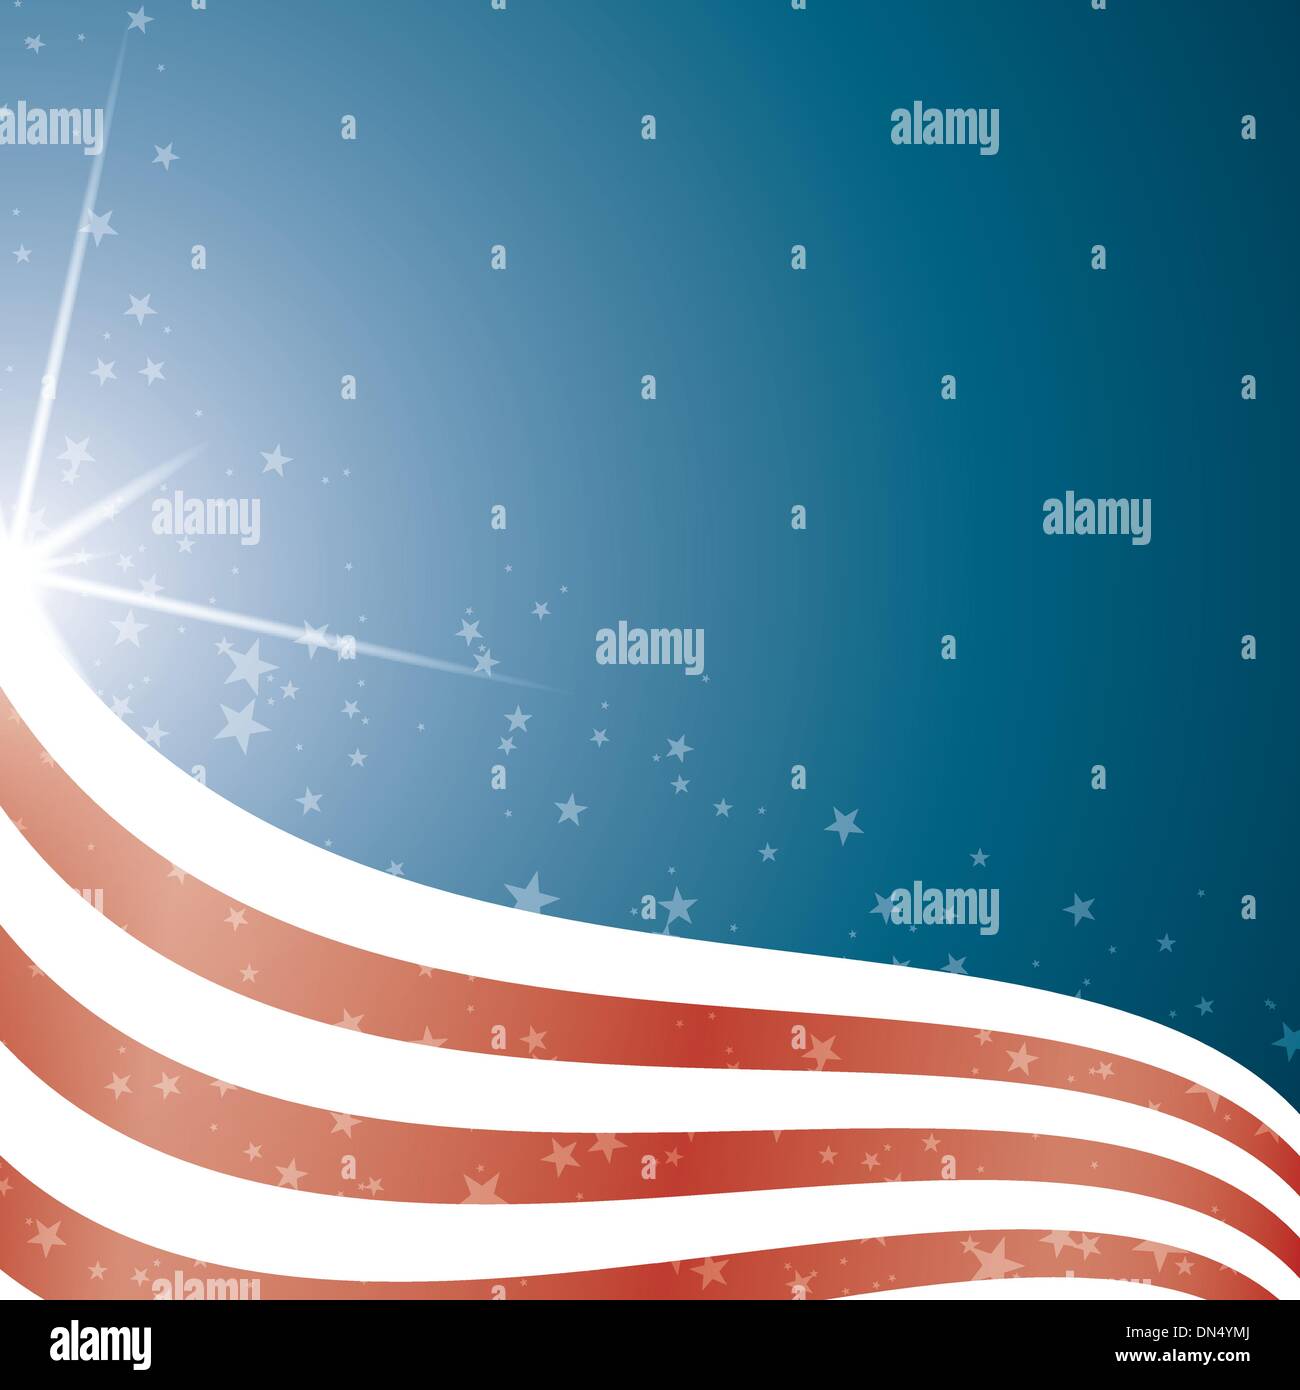 The Meaning Of The Stars And Stripes High-Res Vector Graphic - Getty Images